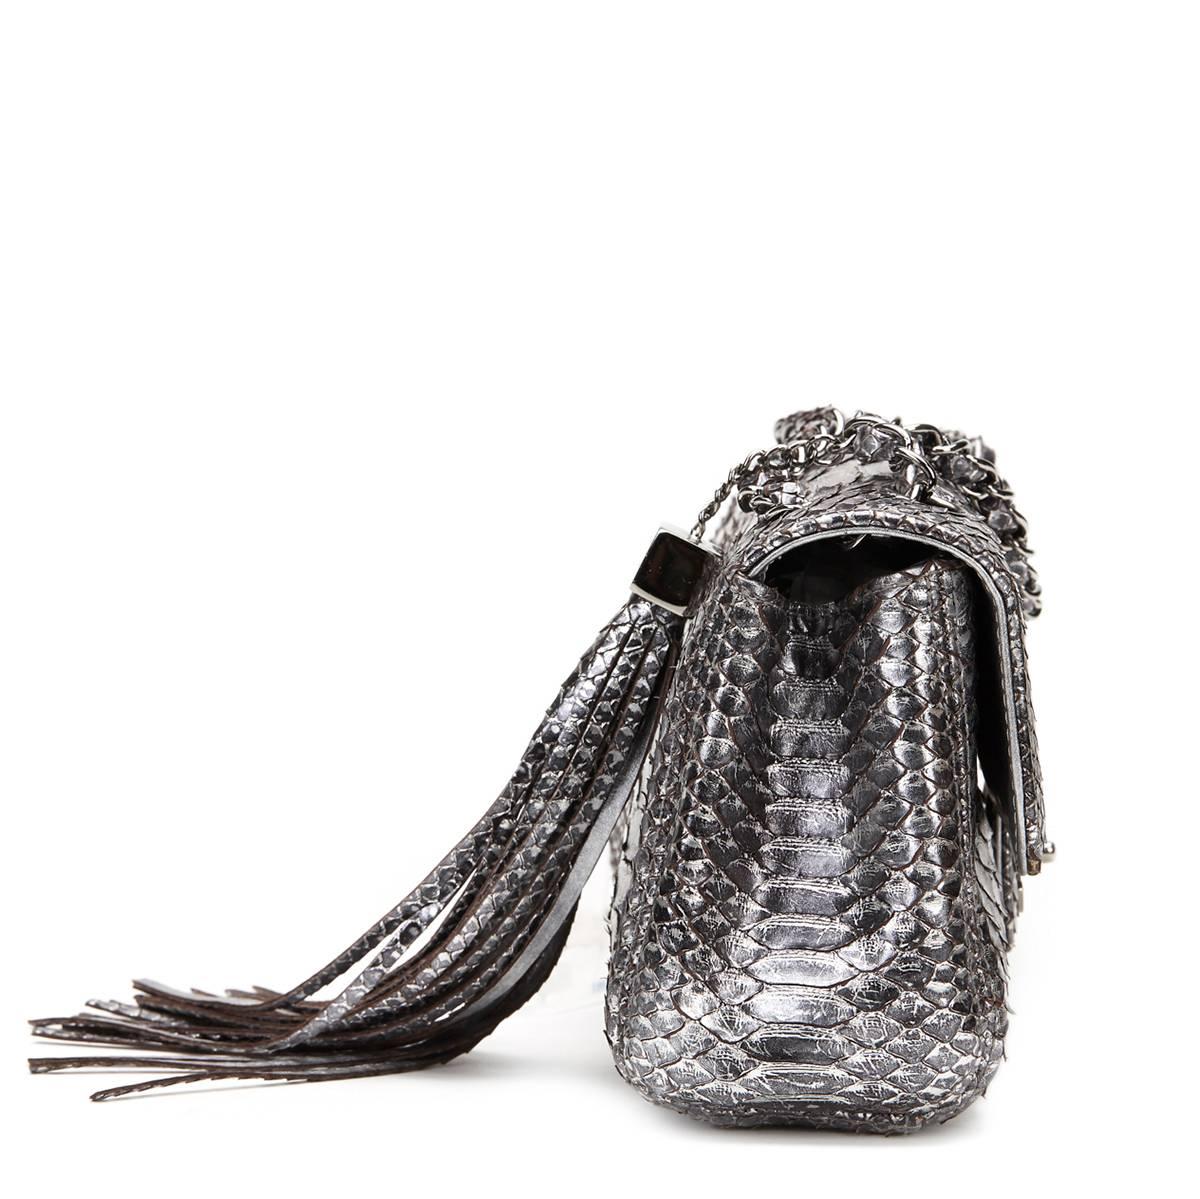 CHANEL
Metallic Silver Python Classic Single Flap Bag

This CHANEL Classic Single Flap Bag is in Excellent Pre-Owned Condition accompanied by Chanel Dust Bag, Authenticity Card. Circa 2007. Primarily made from Python complimented by Silver hardware.